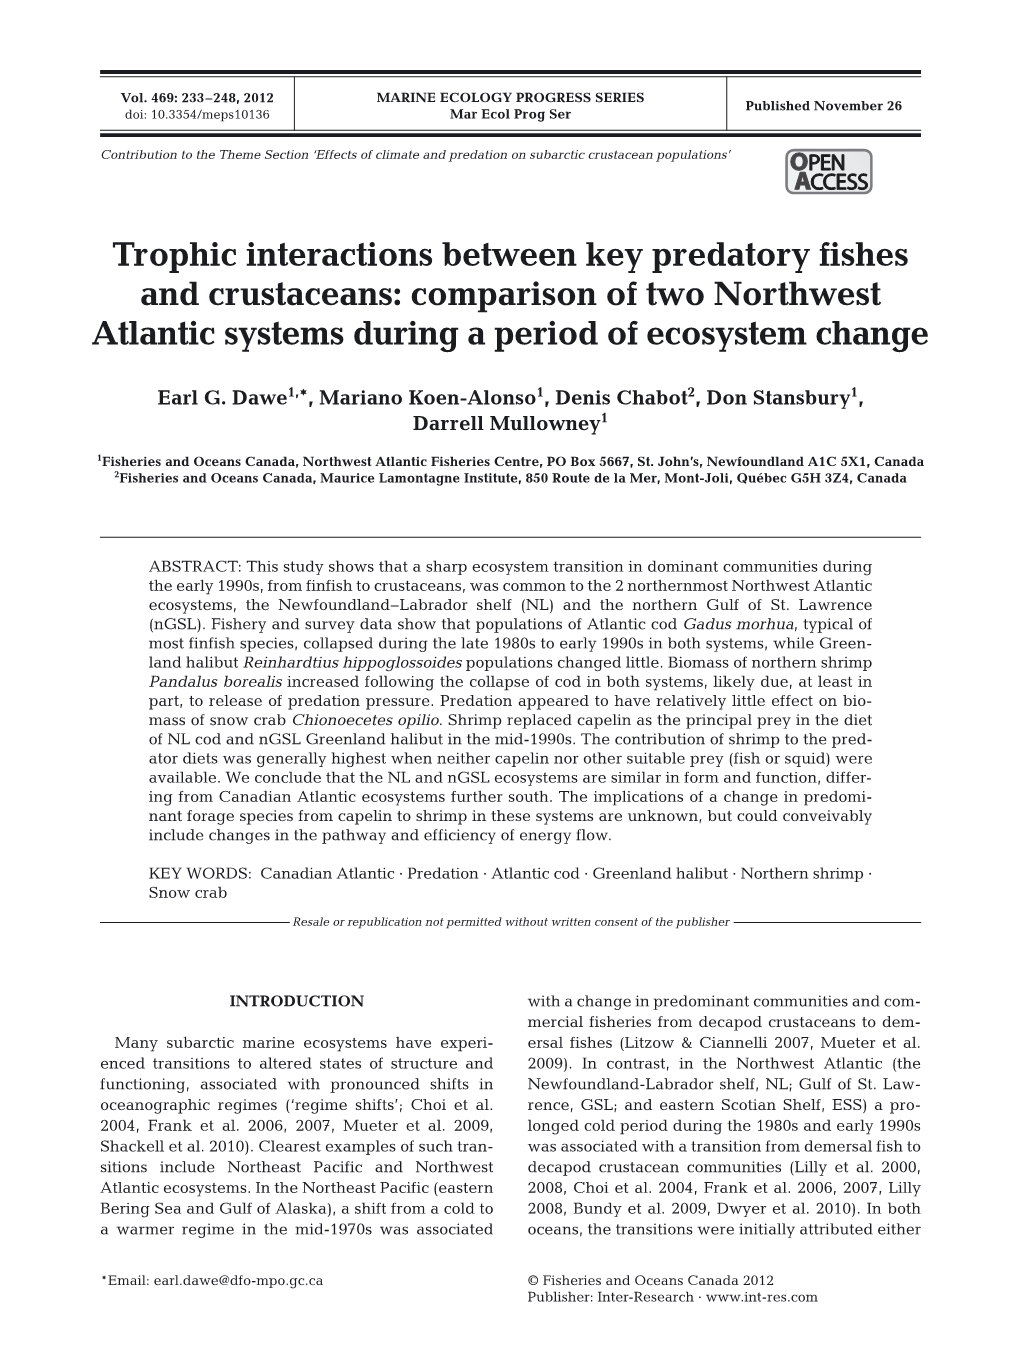 Trophic Interactions Between Key Predatory Fishes and Crustaceans: Comparison of Two Northwest Atlantic Systems During a Period of Ecosystem Change